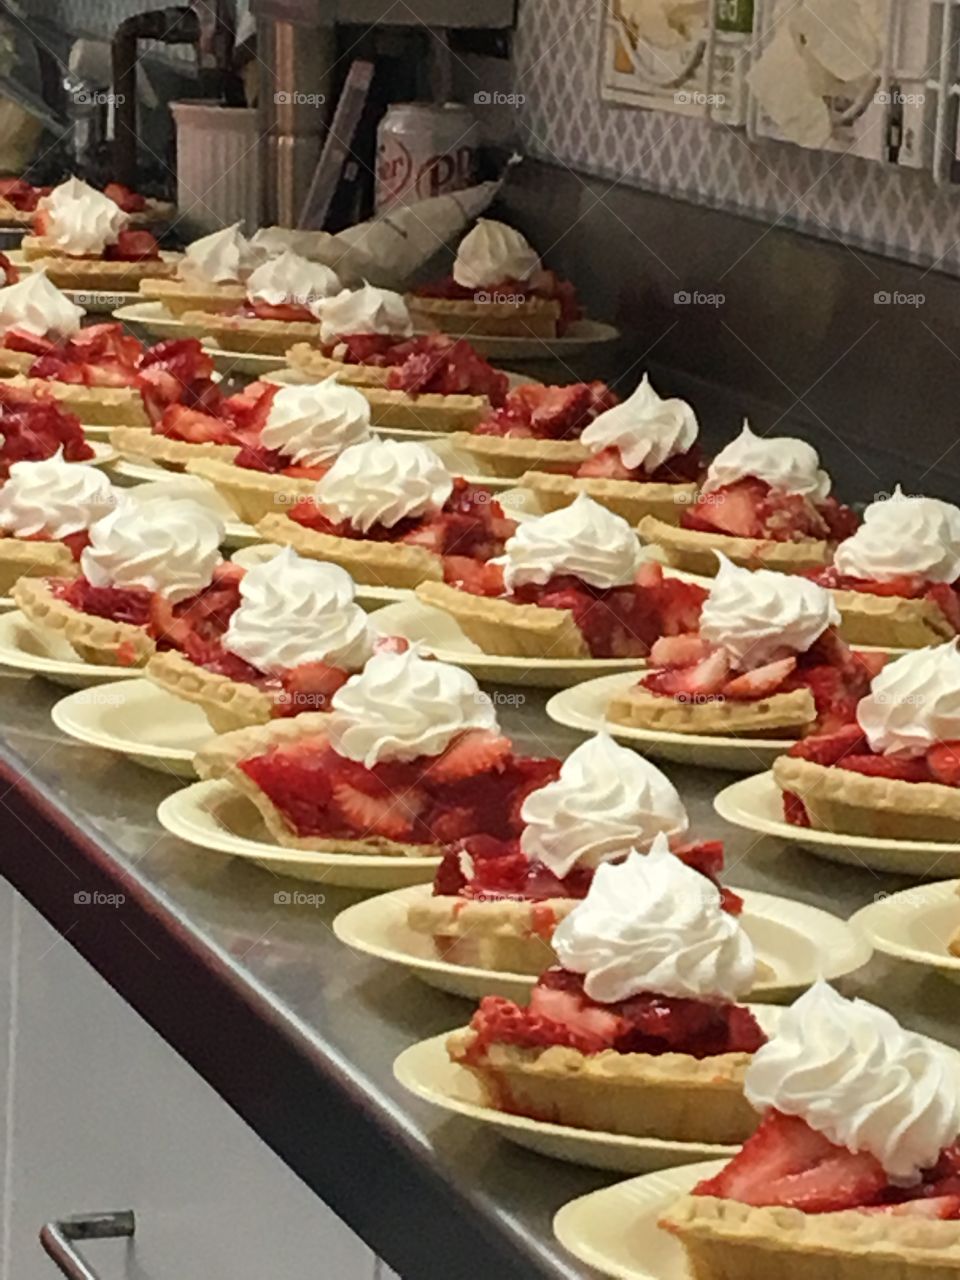 Have a slice of homemade strawberry pie so delicious! Getting ready for the senior lunch.